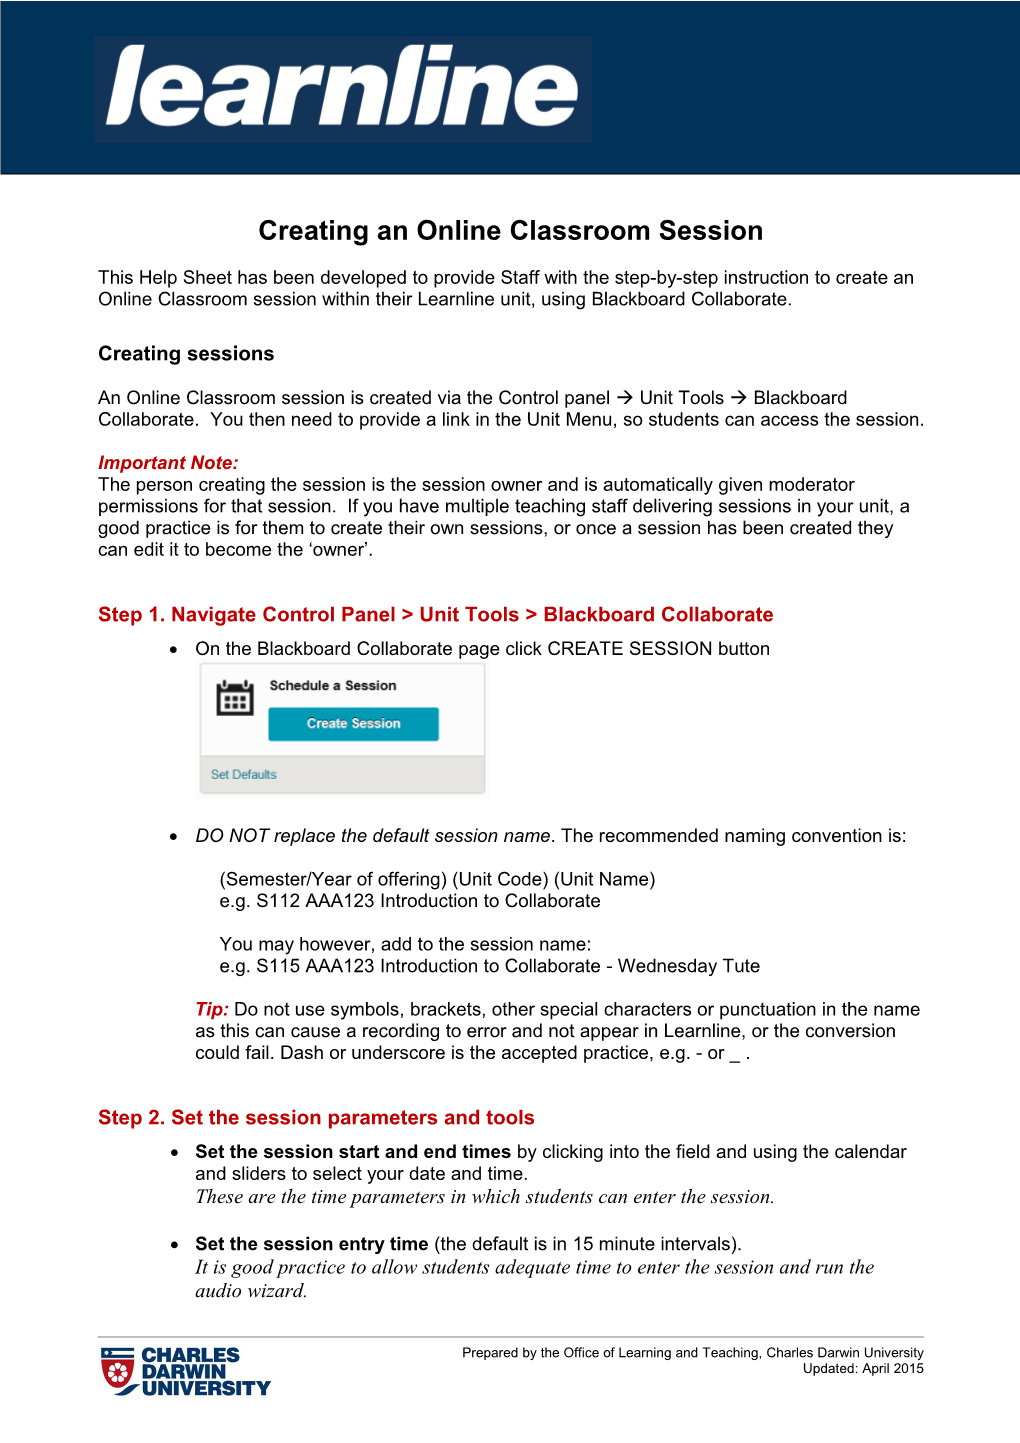 Creating an Online Classroom Session